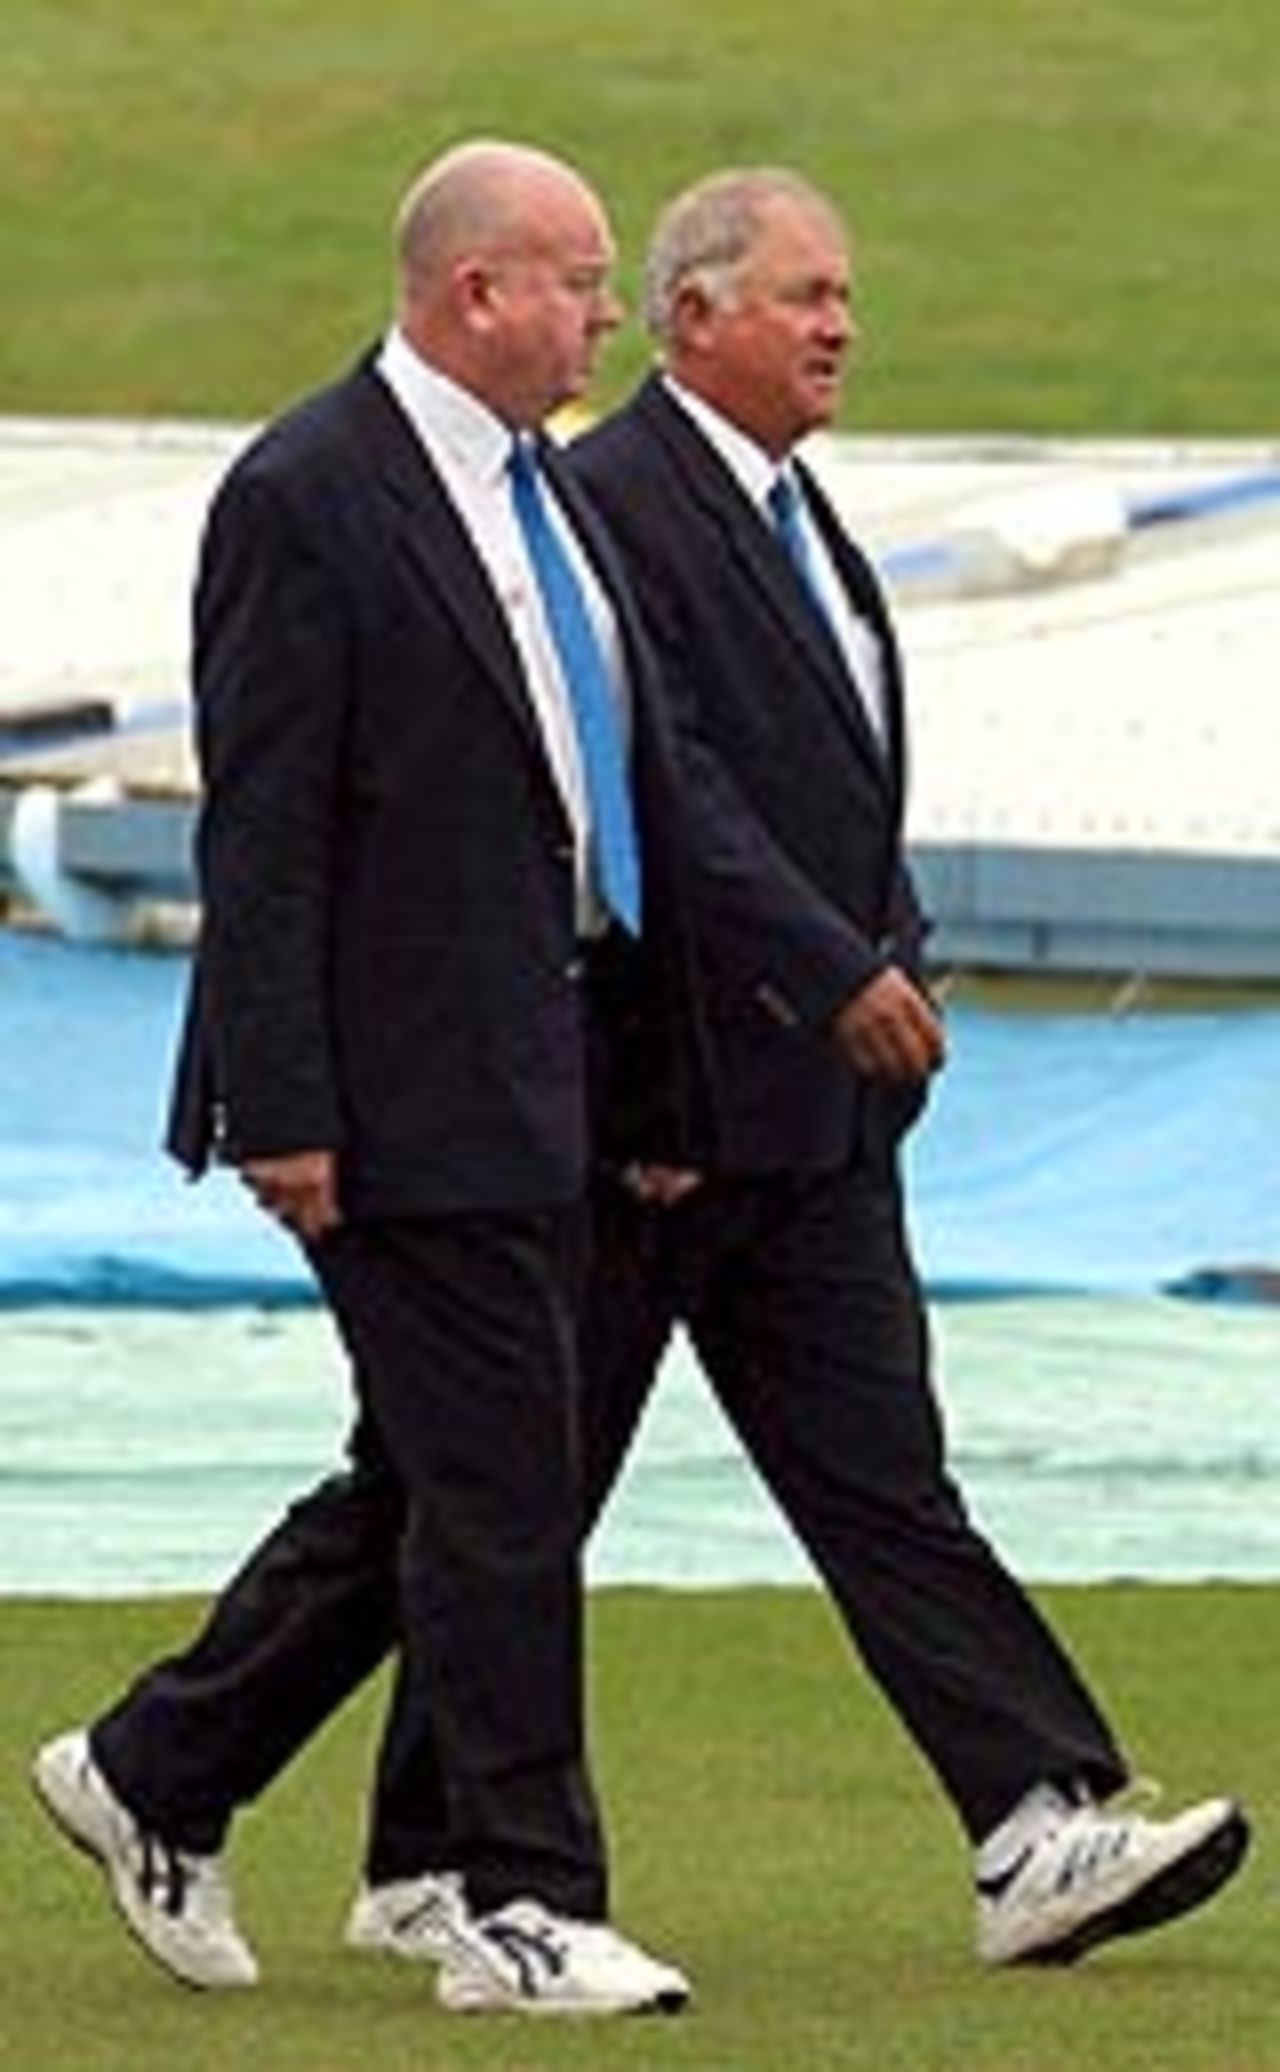 Dave Orchard and Steve Davis during a pitch inspection, New Zealand v Pakistan, 1st Test, Hamilton, 5th day, December 23, 2003